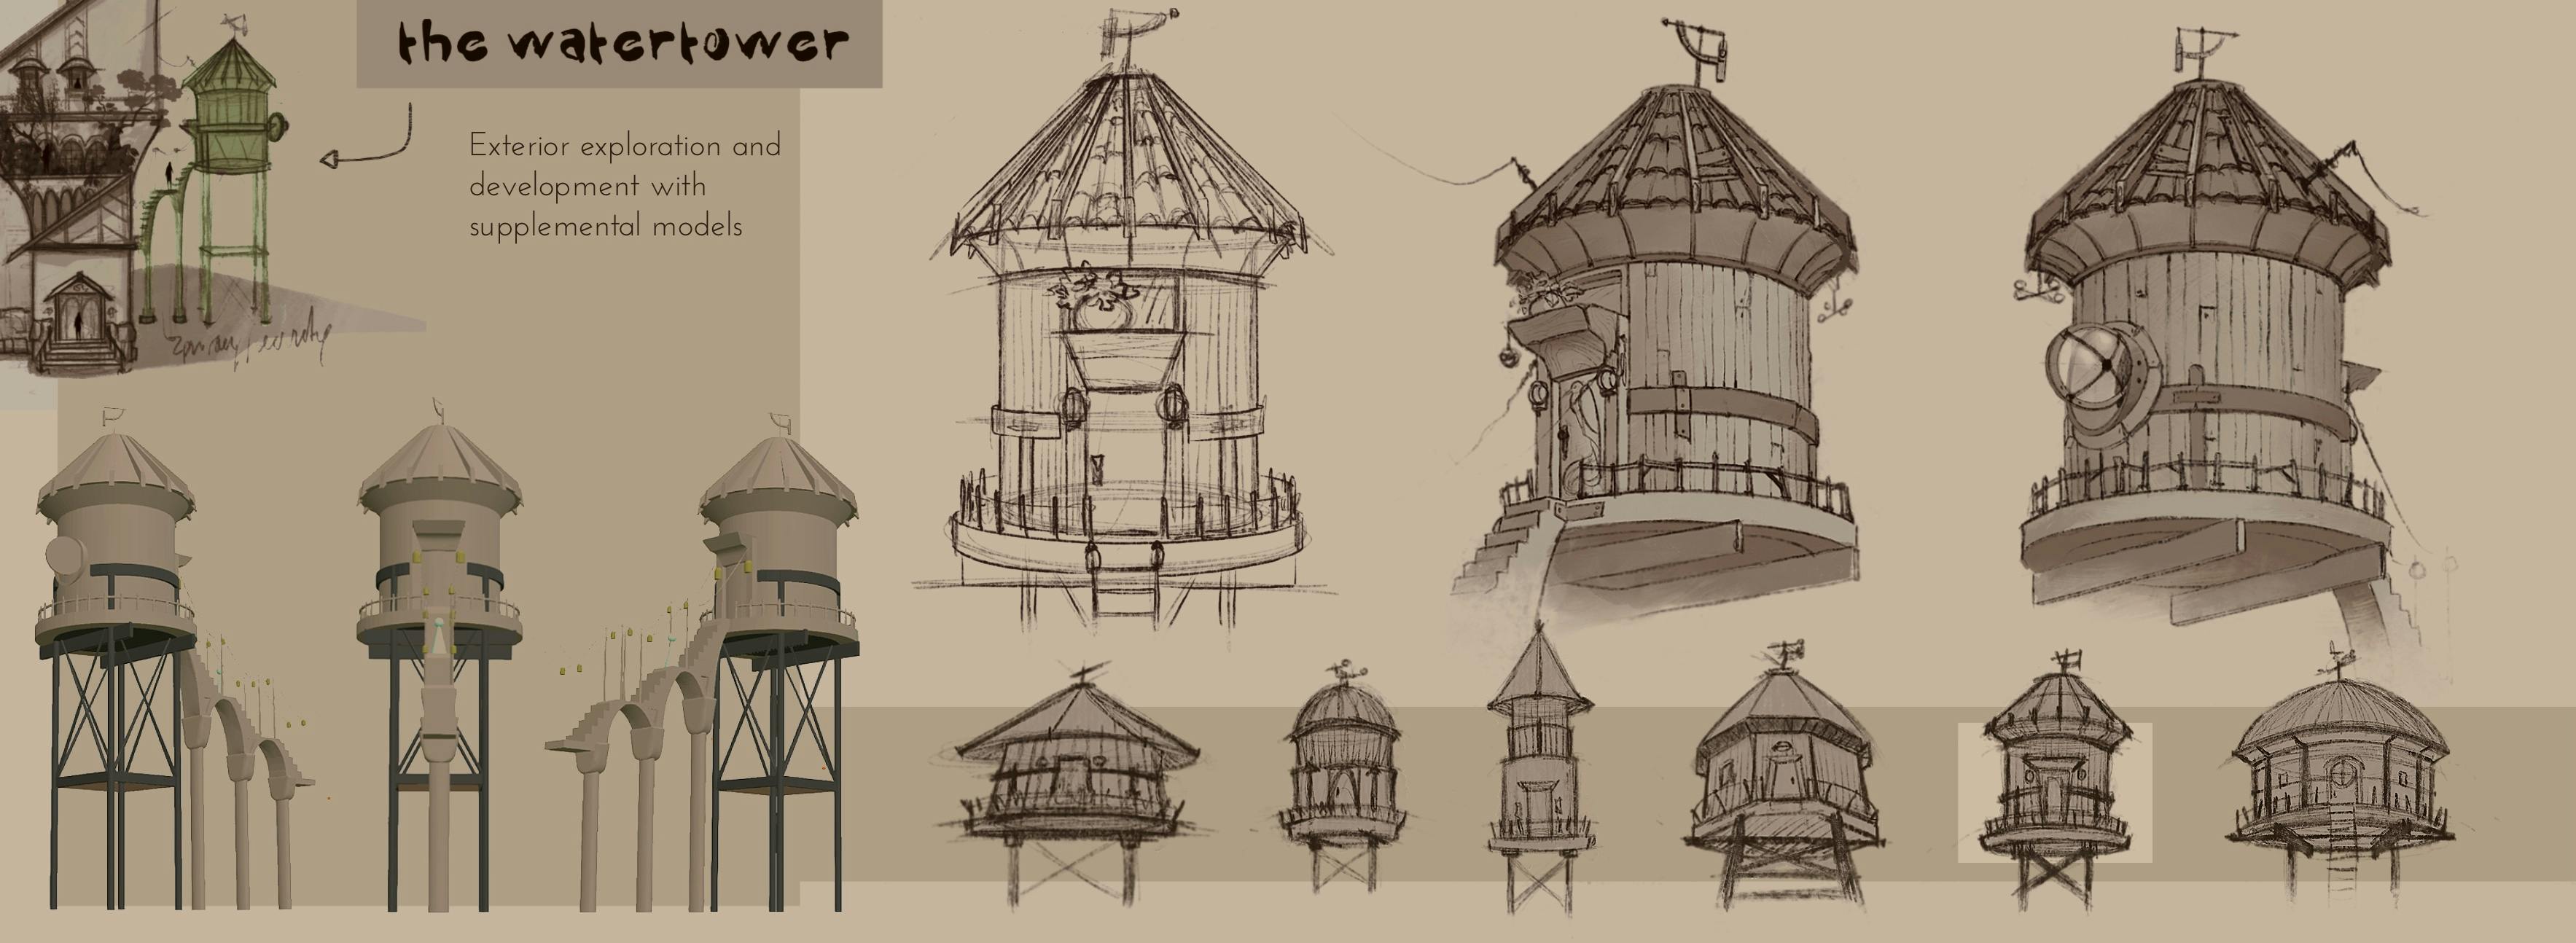 Concept art of a water tower